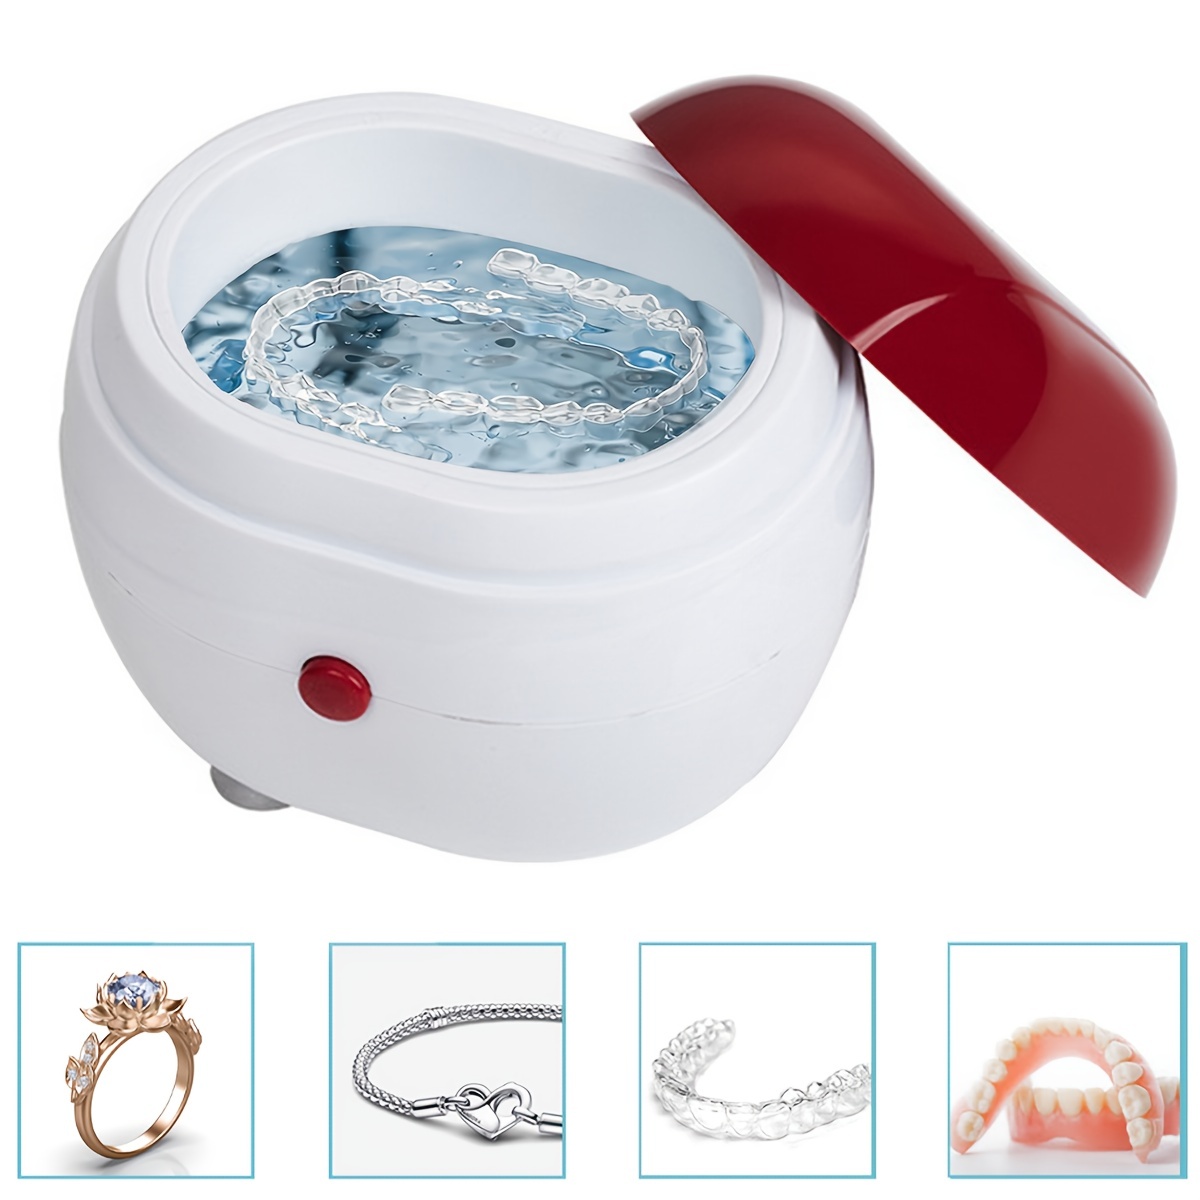 

Mini Ultrasonic Denture Cleaner, Denture Cleaning Case, Automatic Denture Cleaning Box, Jewelry And Watch Cleaning Device